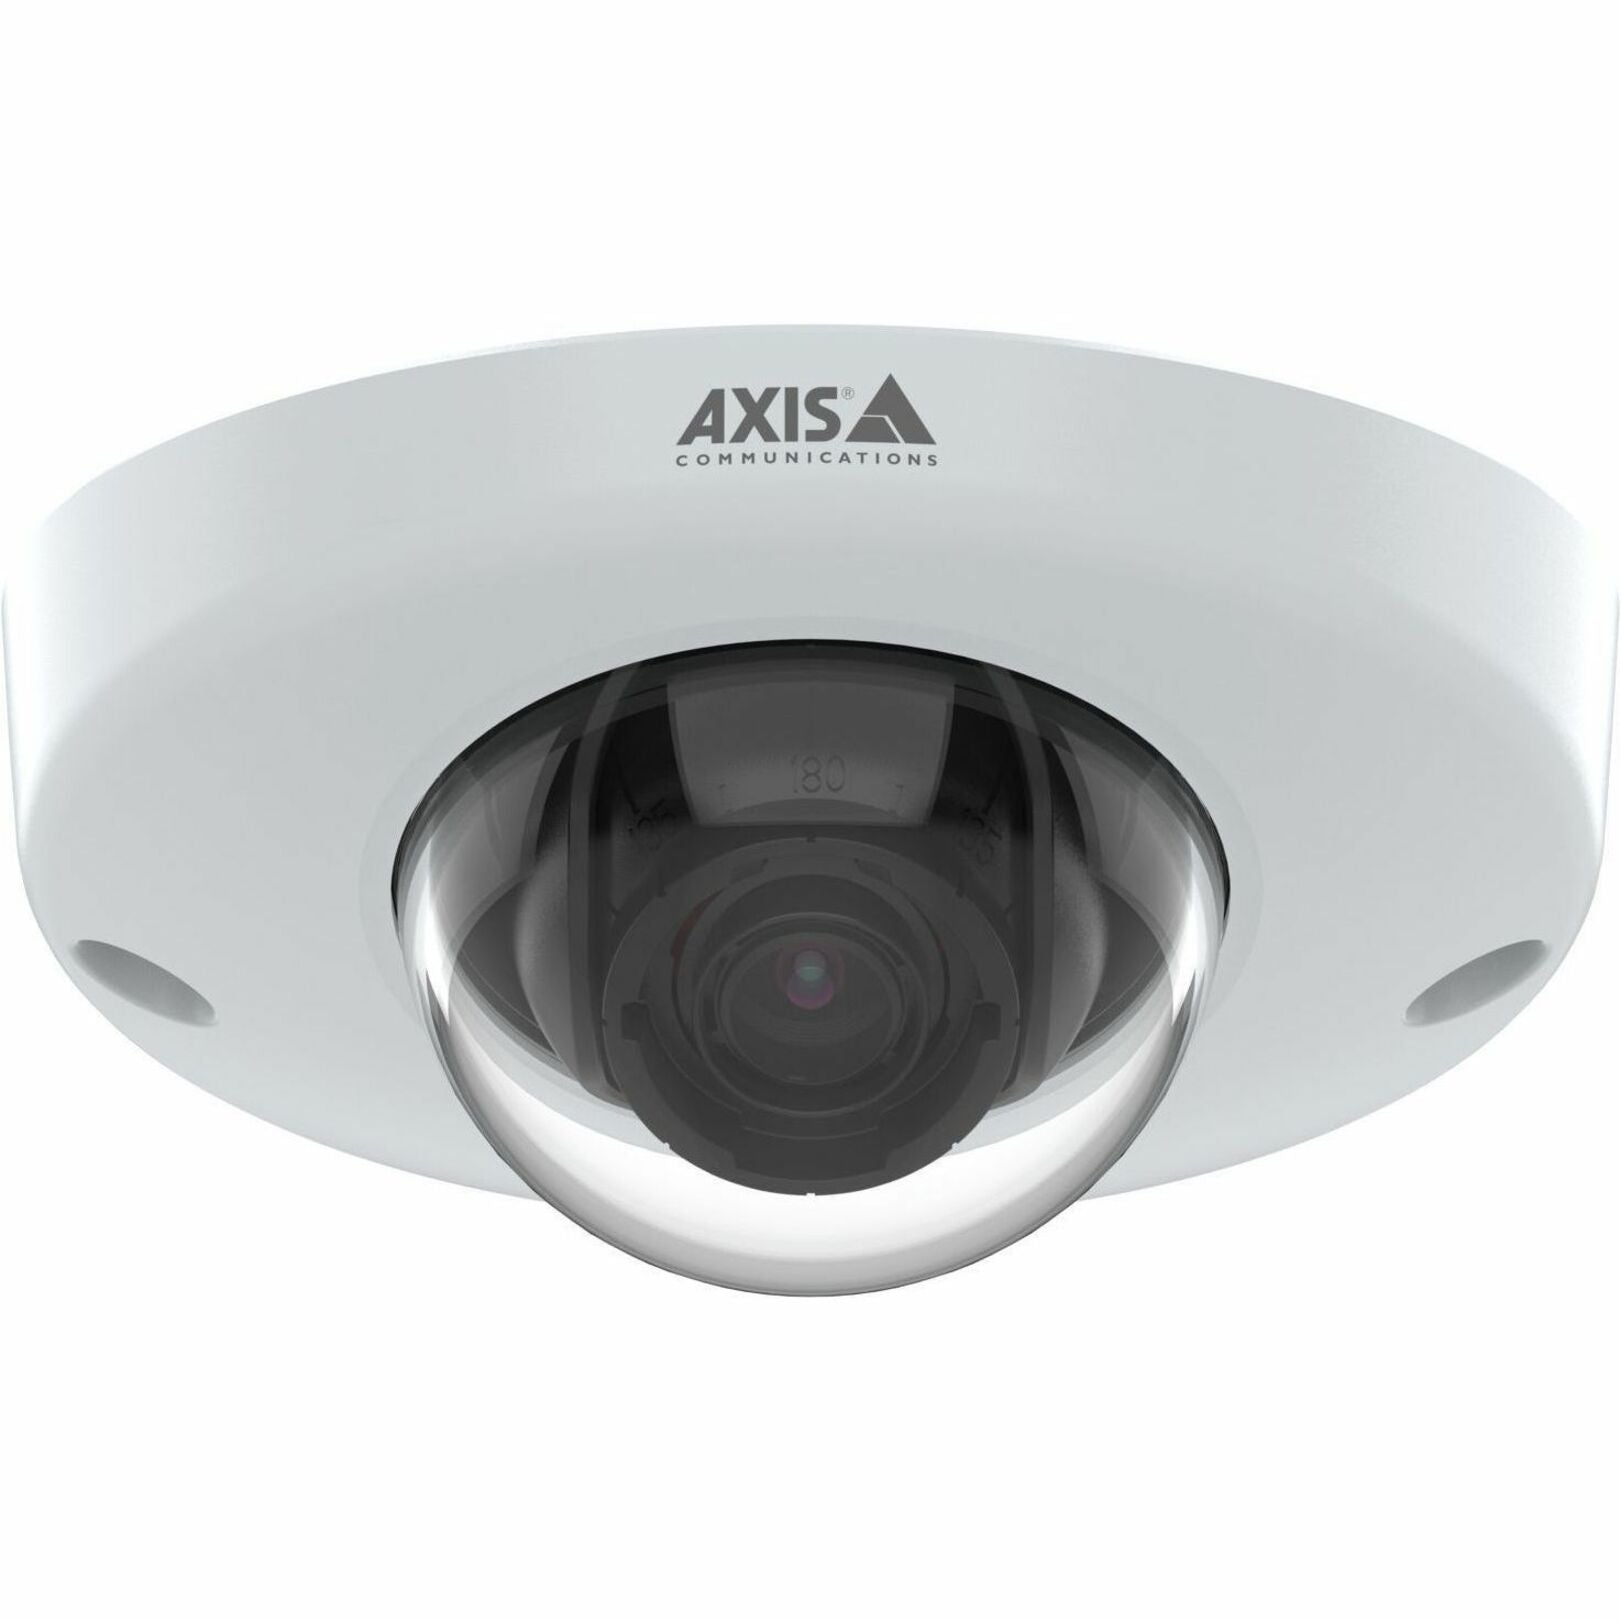 AXIS 02501-001 WizMind M3905-R Dome Camera, Outdoor, 2 Megapixel, Full HD, PoE